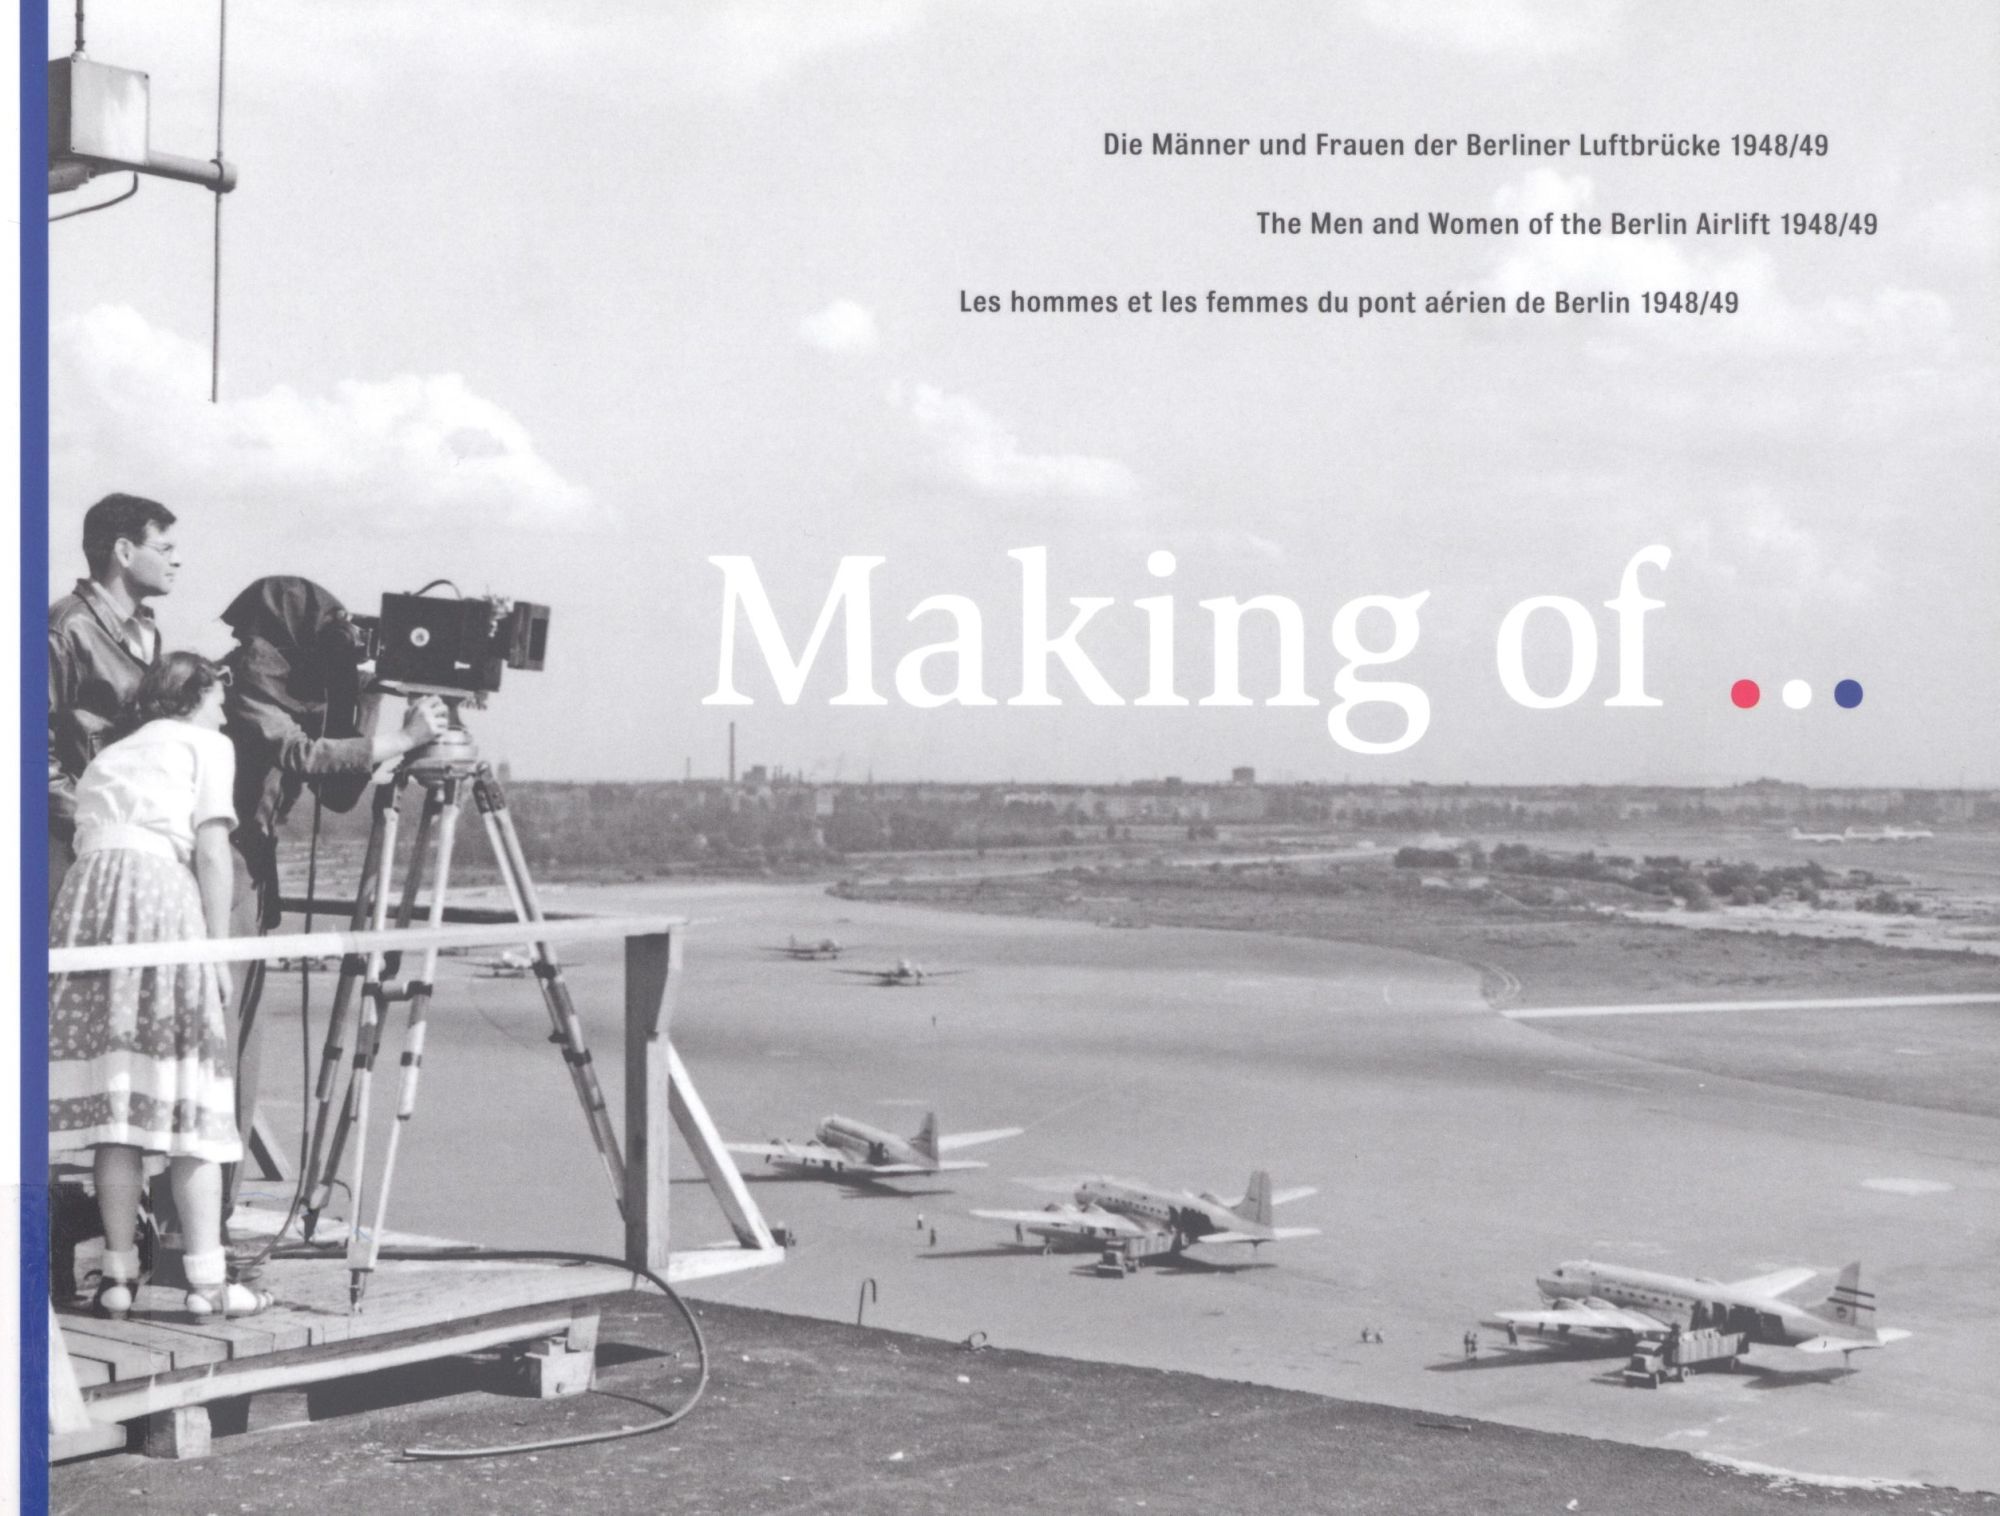 Making of … The Men and Women of the Berlin Airlift 1948/49